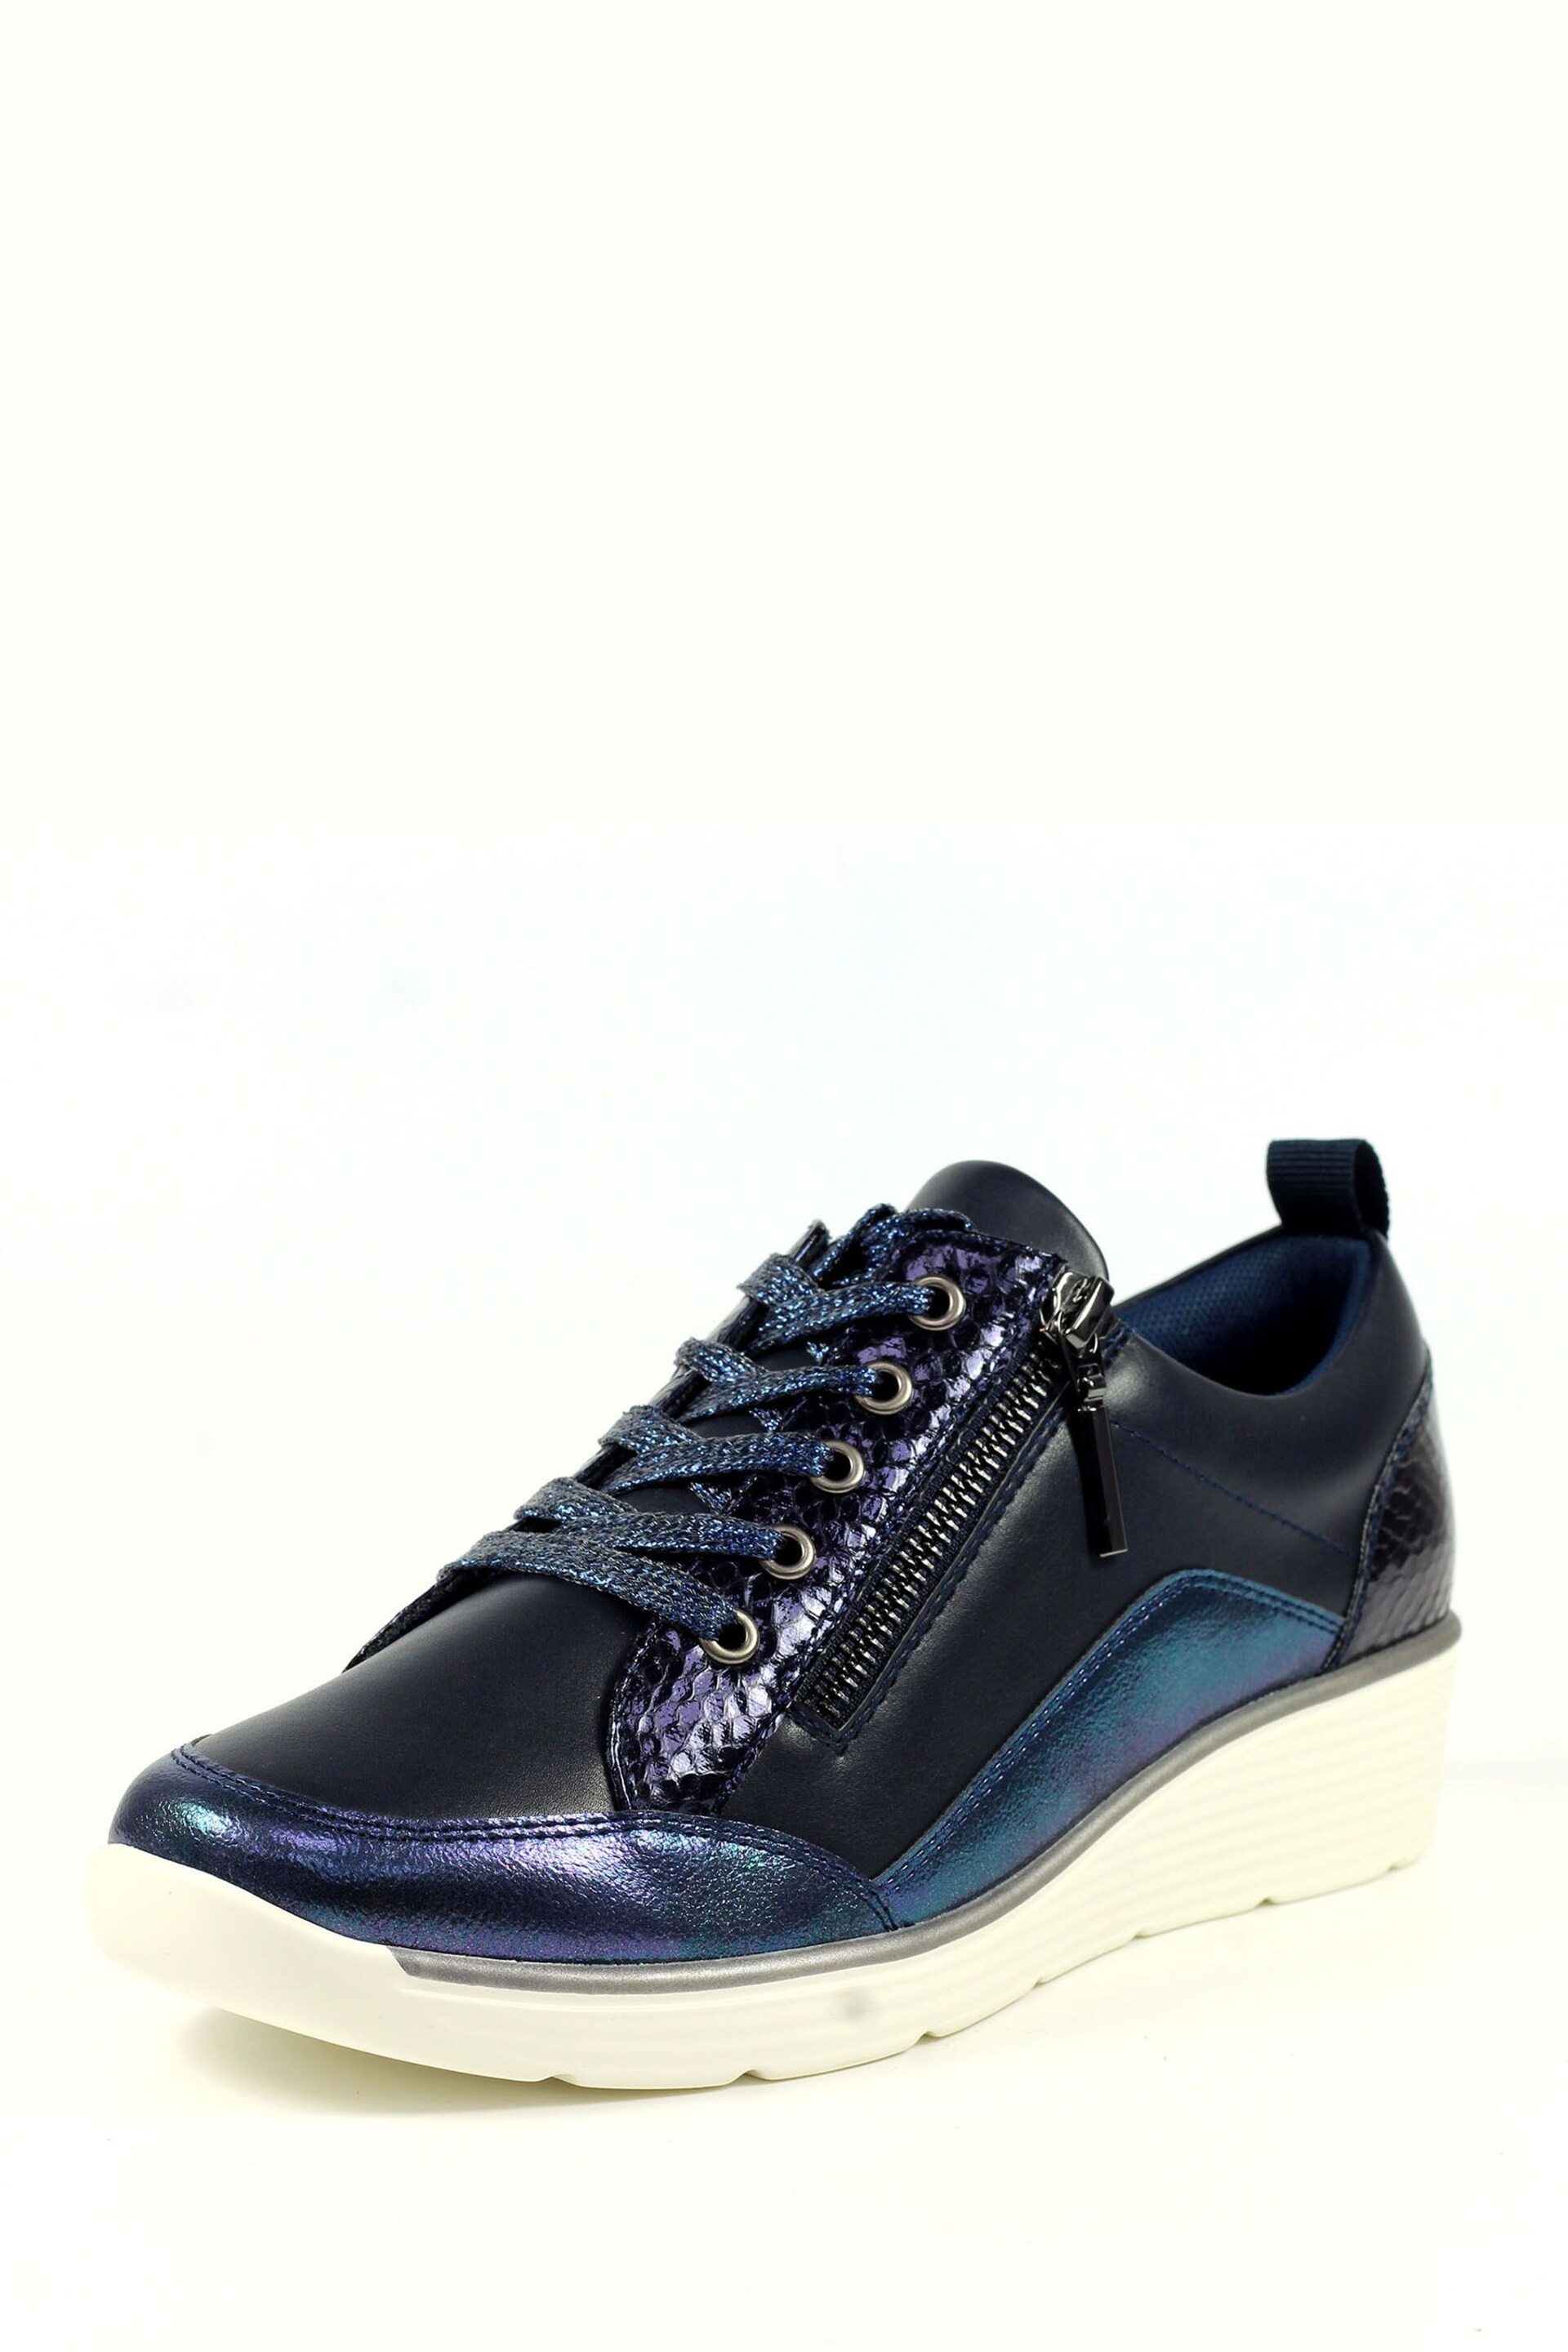 Lunar Navy Blue Kiley Trainers - Image 3 of 8